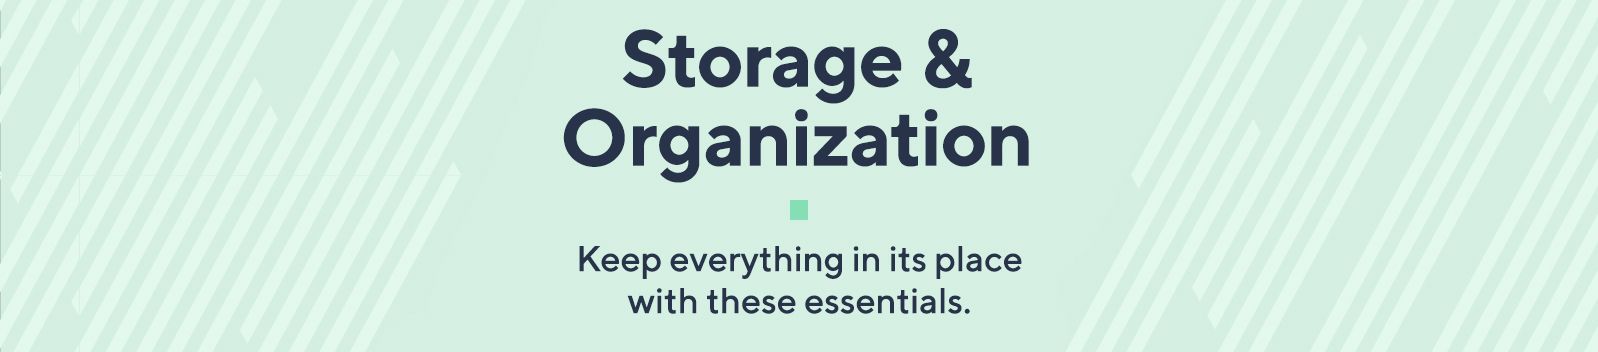 Storage & Organization - Keep everything in its place with these essentials.